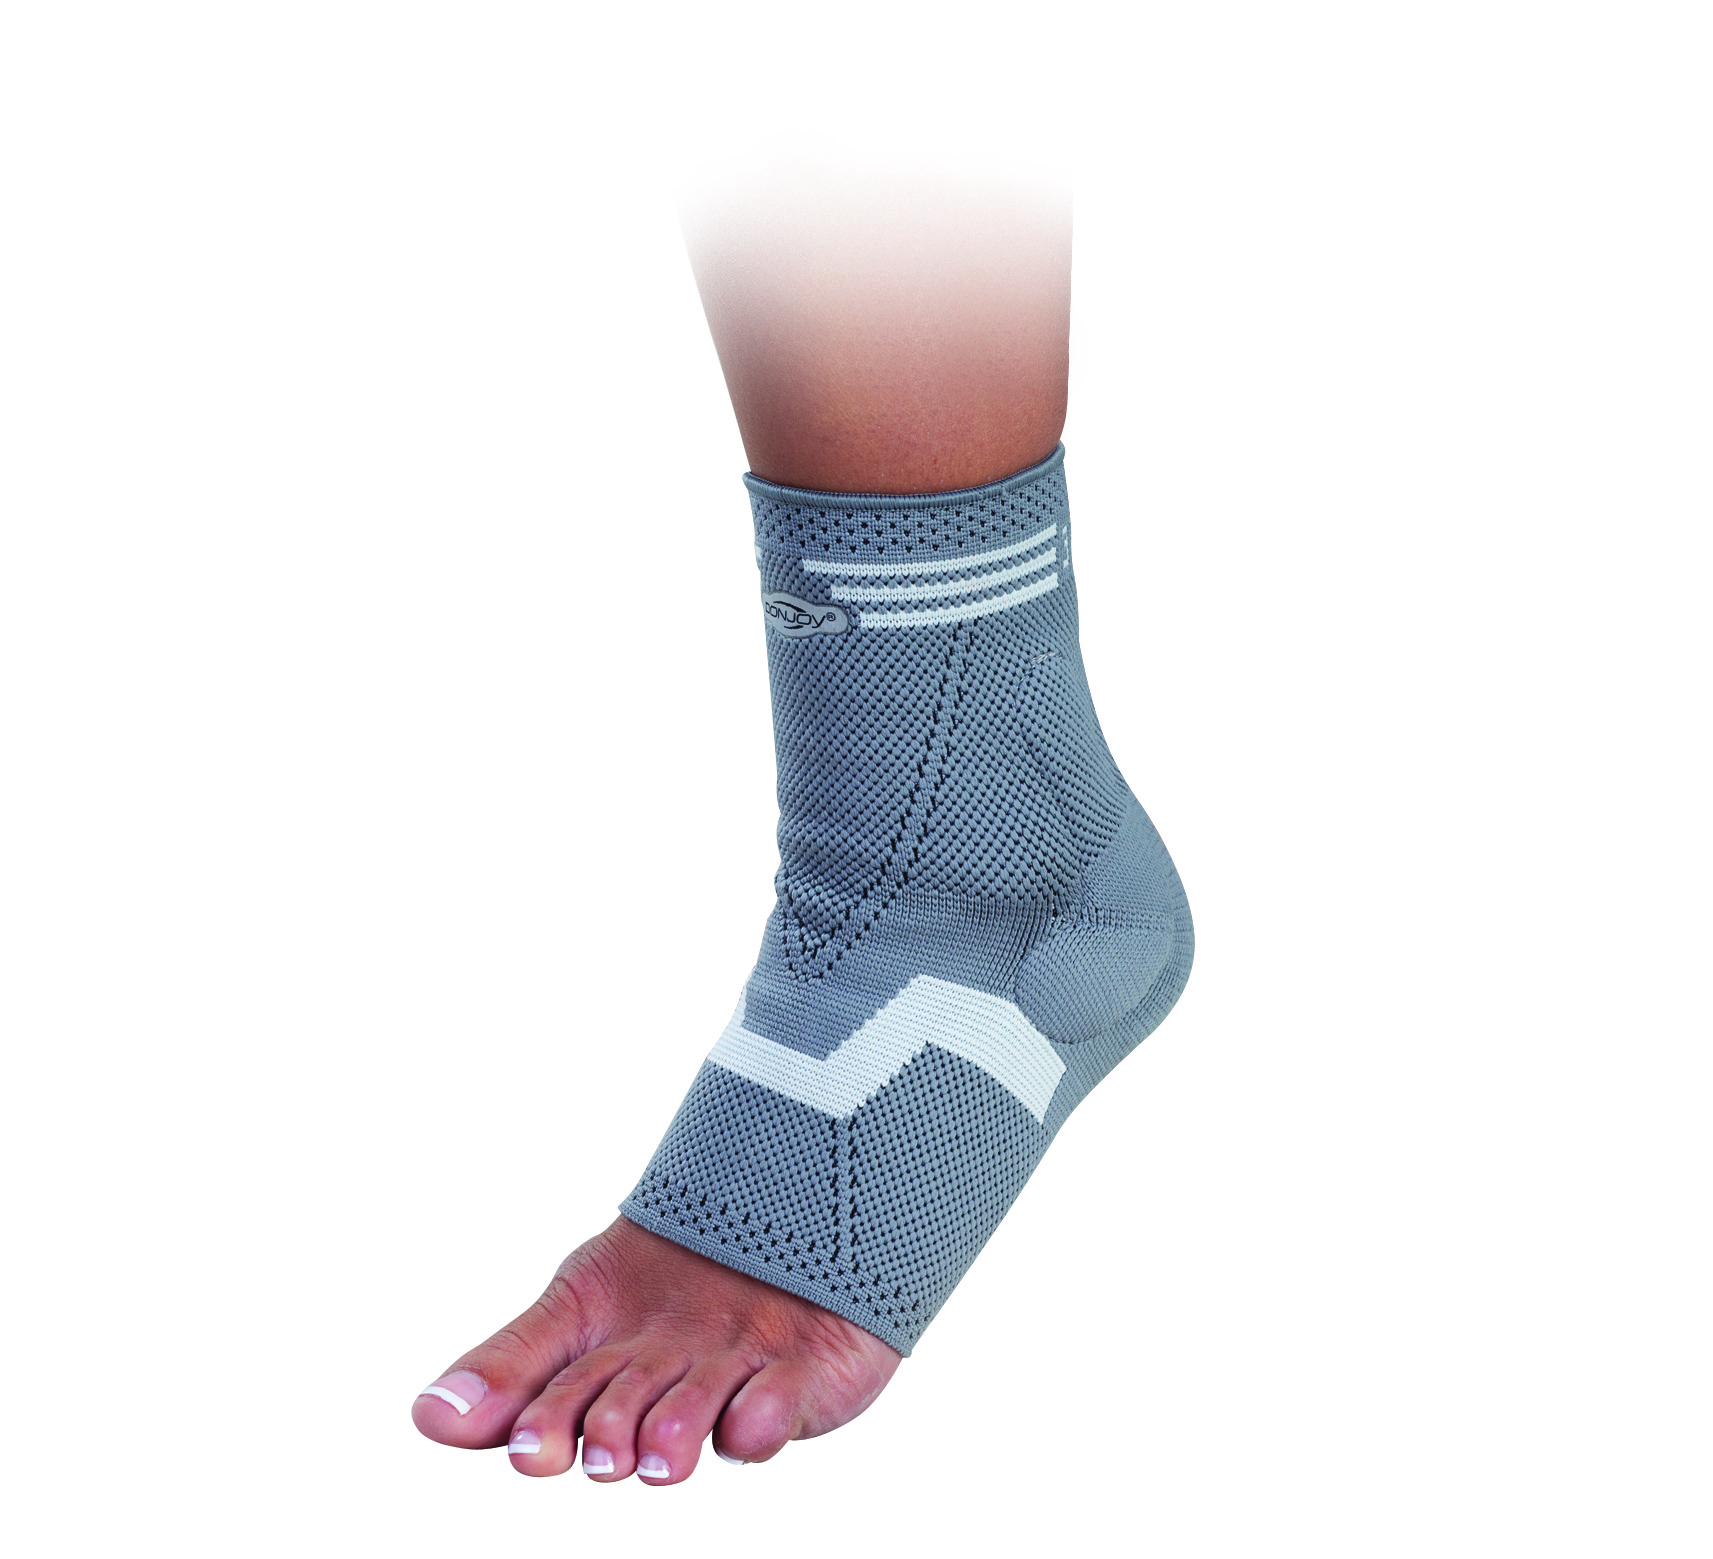 Malolax Elastic Ankle Support